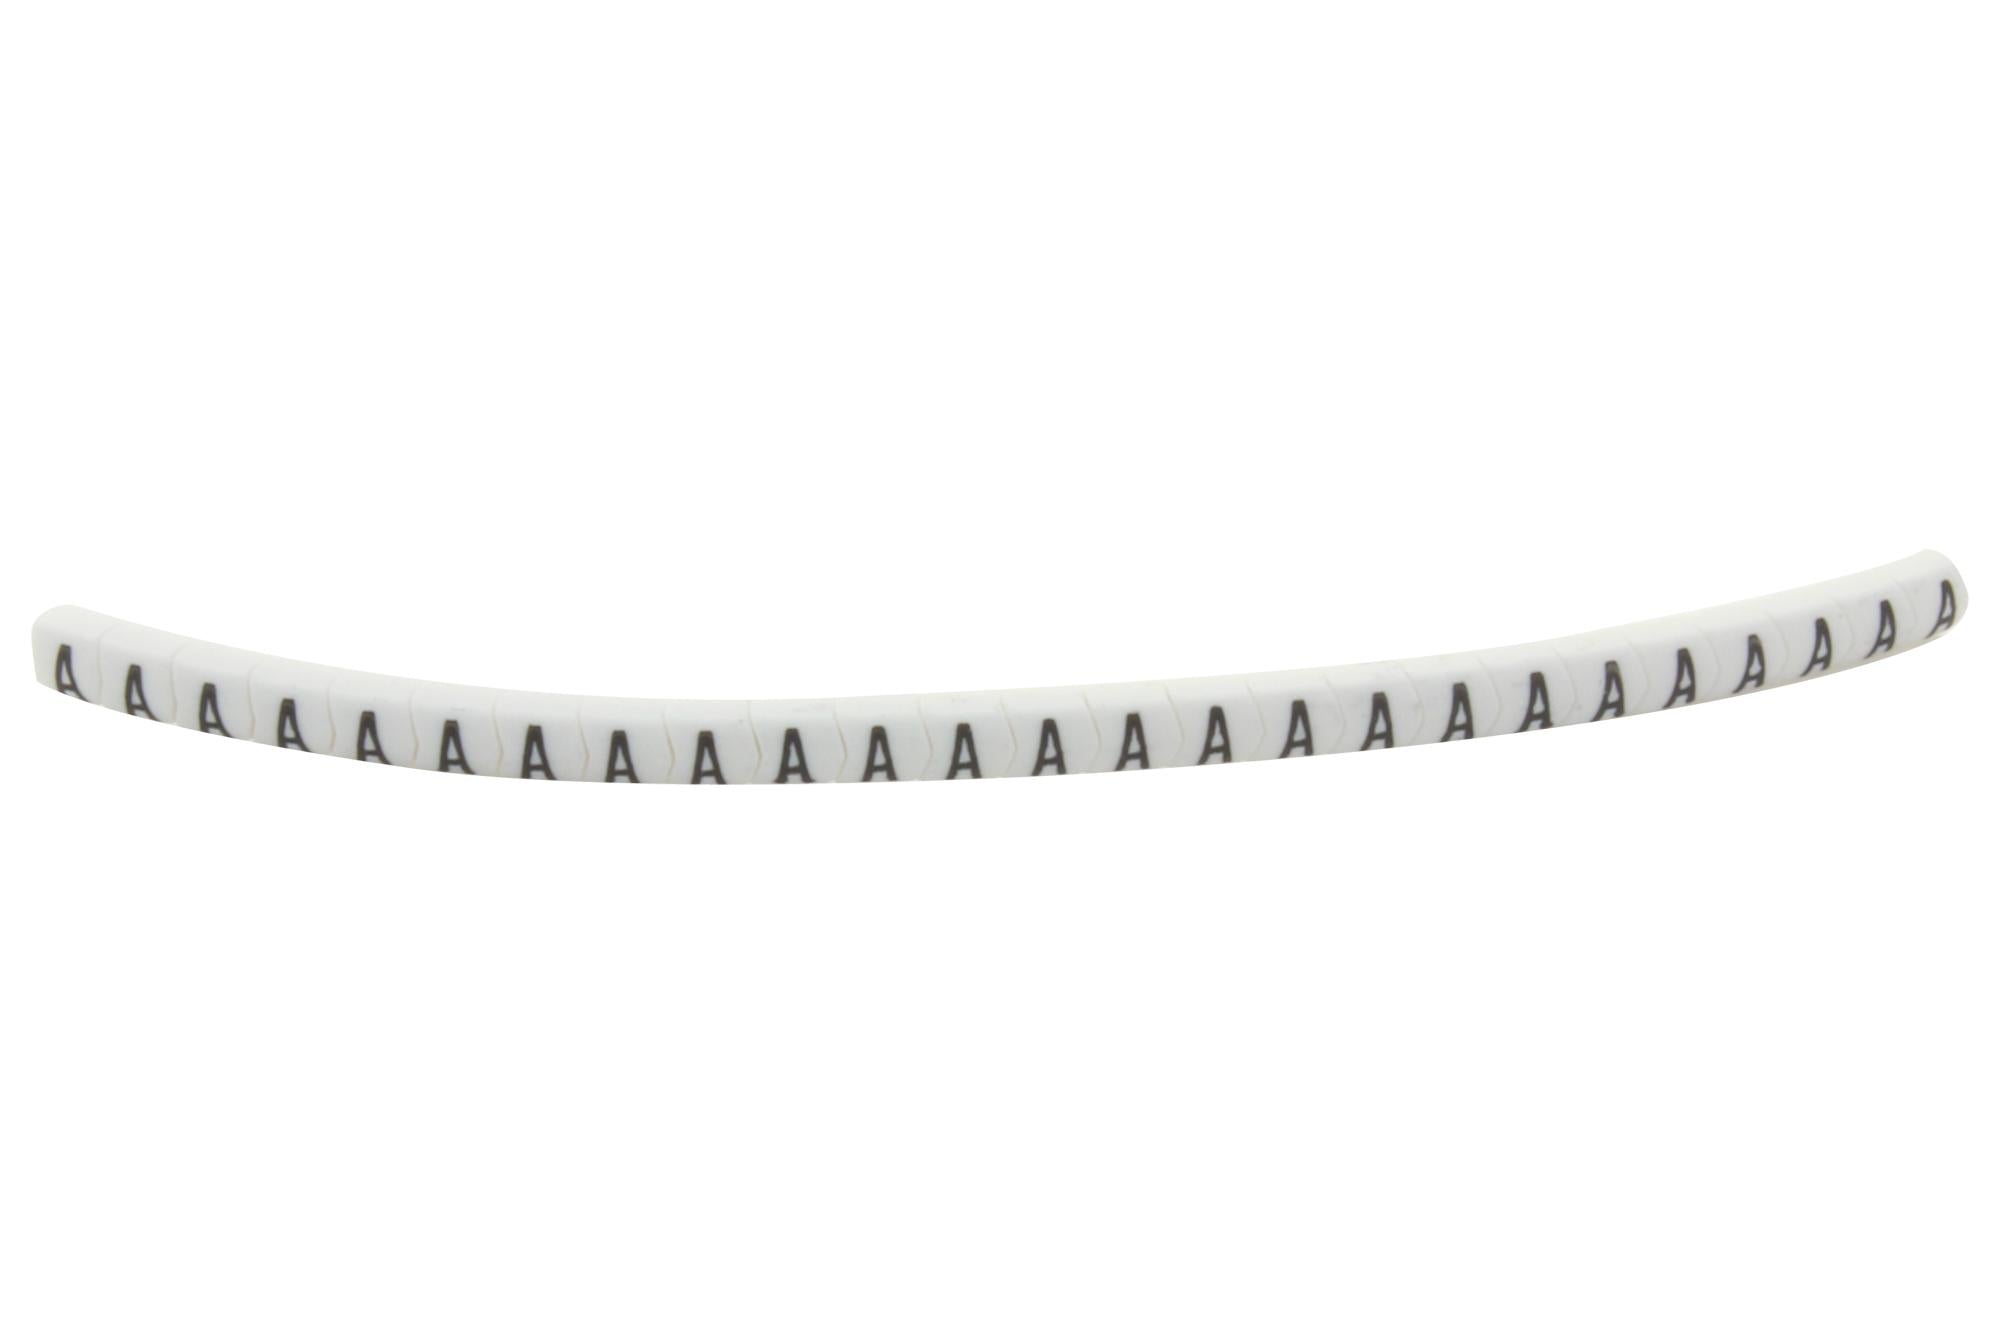 901-11074 CABLE MARKER, PRE PRINTED, PVC, WHITE HELLERMANNTYTON